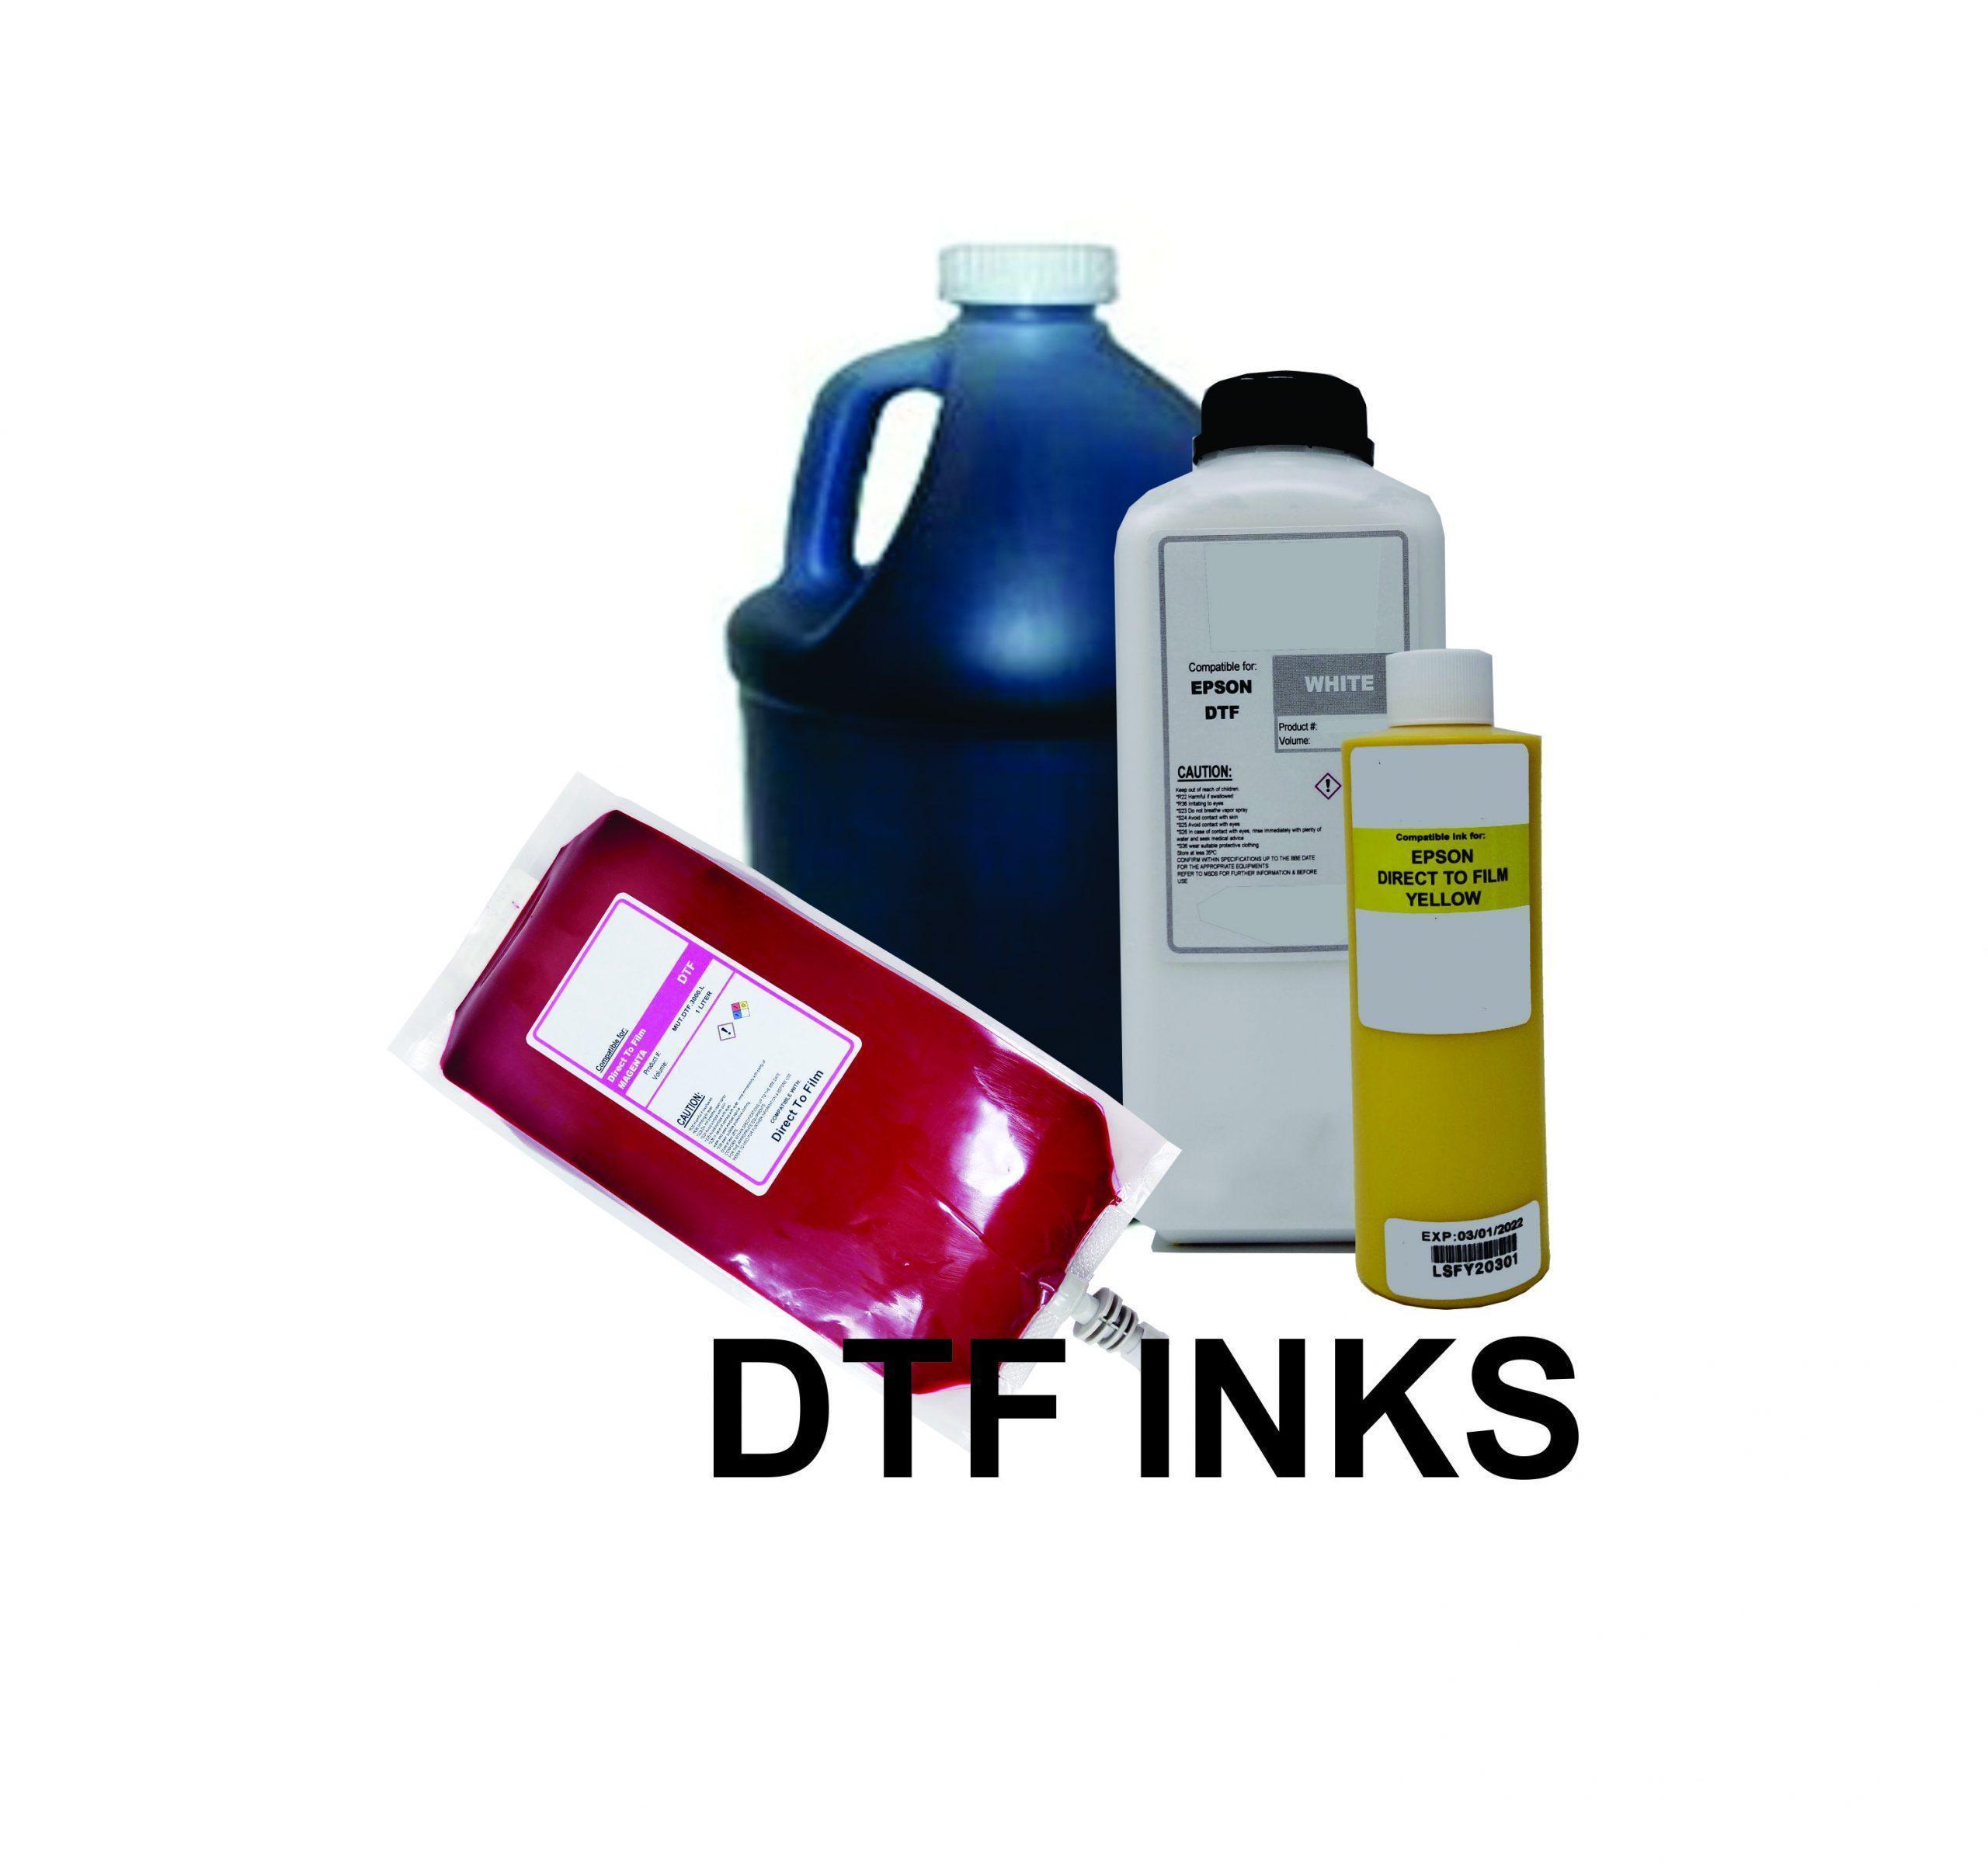 DTF Transfer Inks DTF textile printing ink is manufactured in the USA to be  compatible with Epson printheads. You can print and transfer your designs  to different textiles and fabrics using Direct